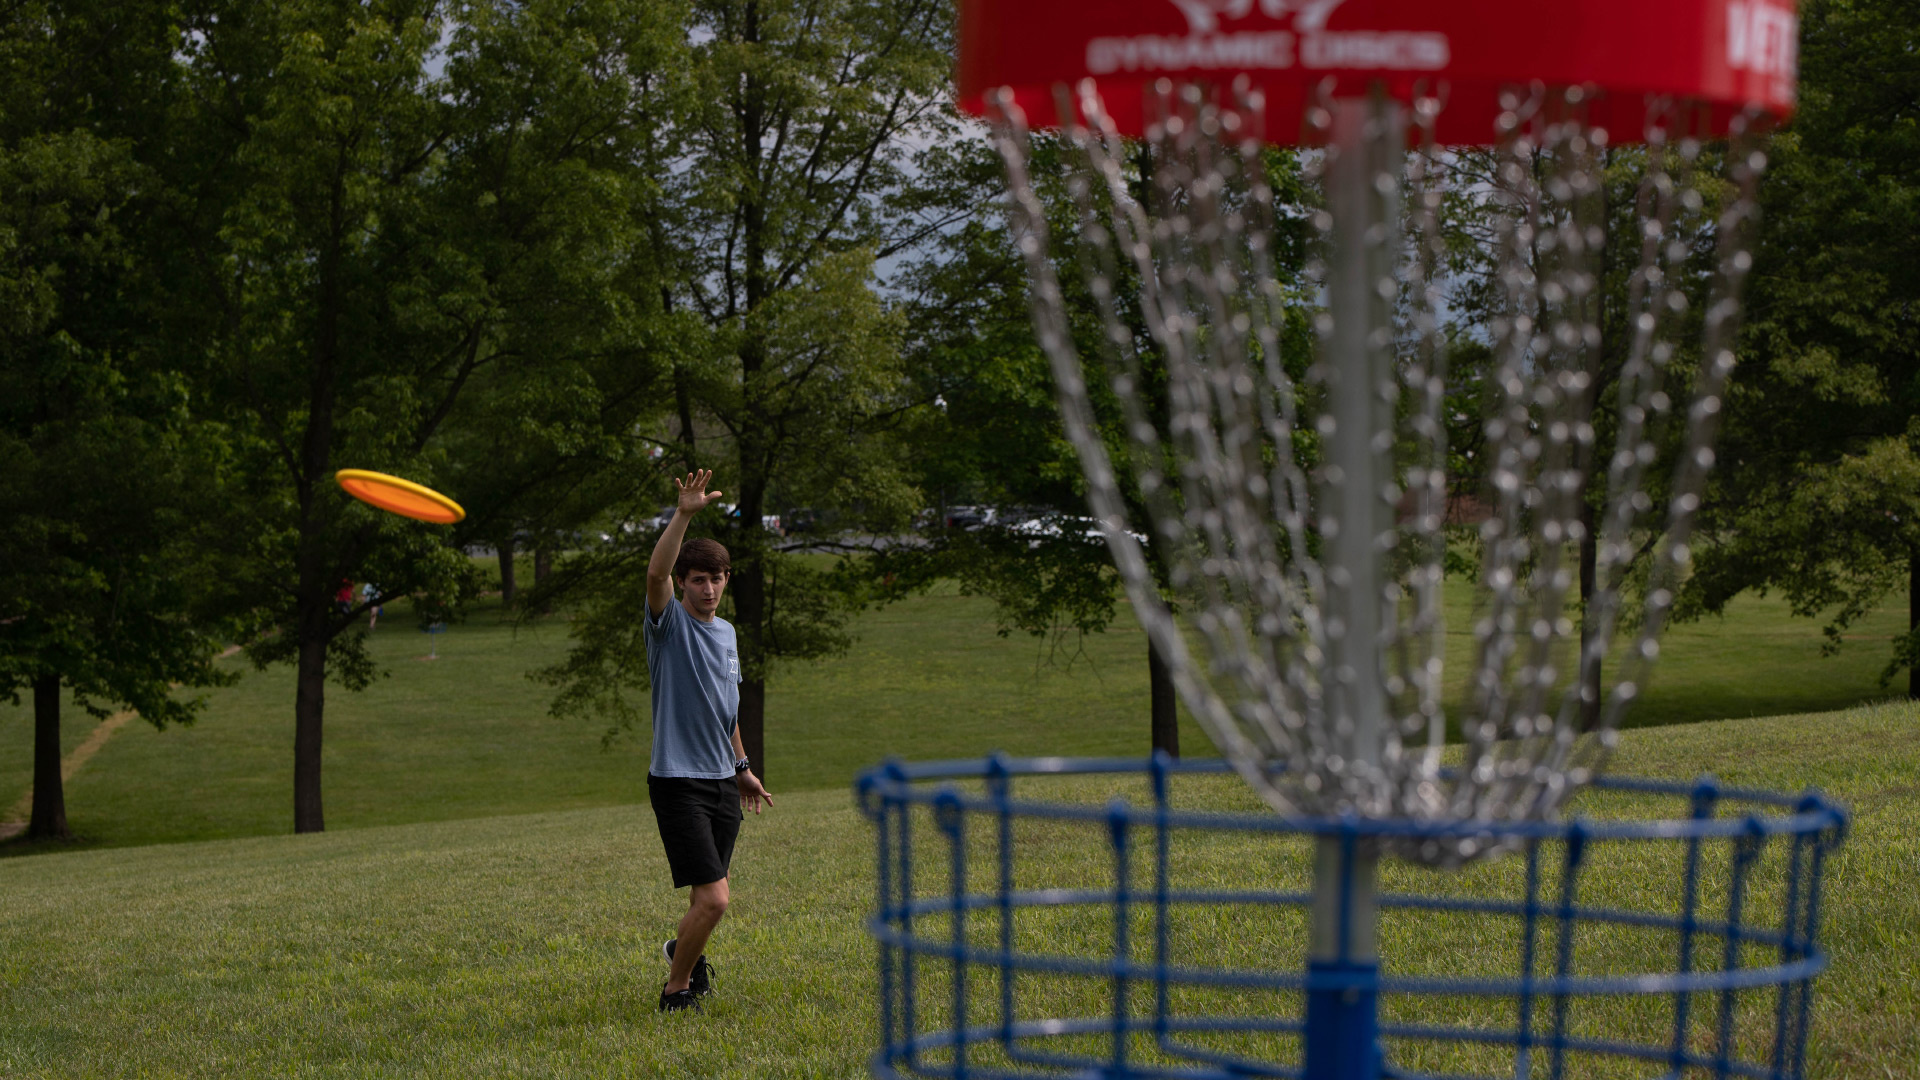 Flying disc sports, Campus disc golf, Course features, Hanover college, 1920x1080 Full HD Desktop